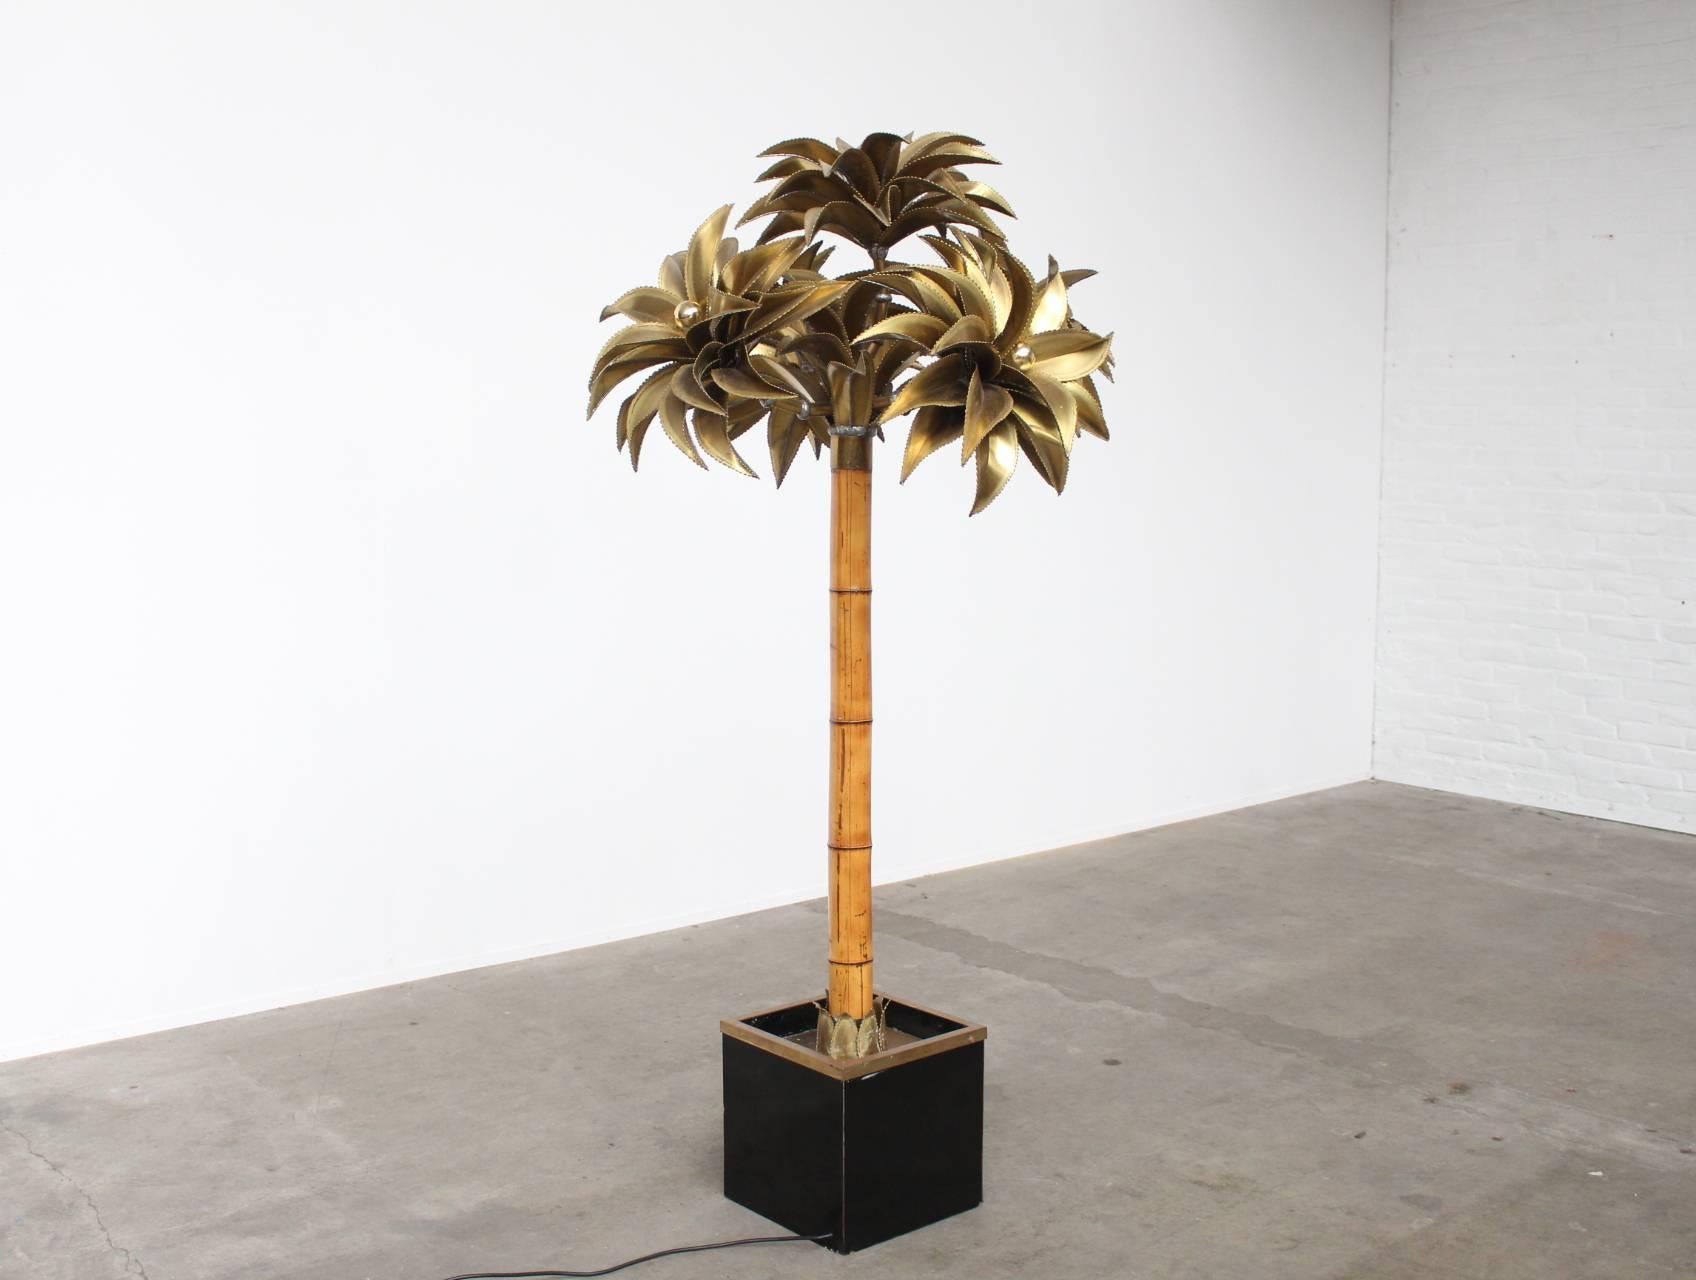 Exceptional palm tree floorlamp with 5 large copper clusters of leafs and flowers lit by 6 light sources. This is one of the first editions of palm tree floor lamps which the ditinctive bamboo trunk.